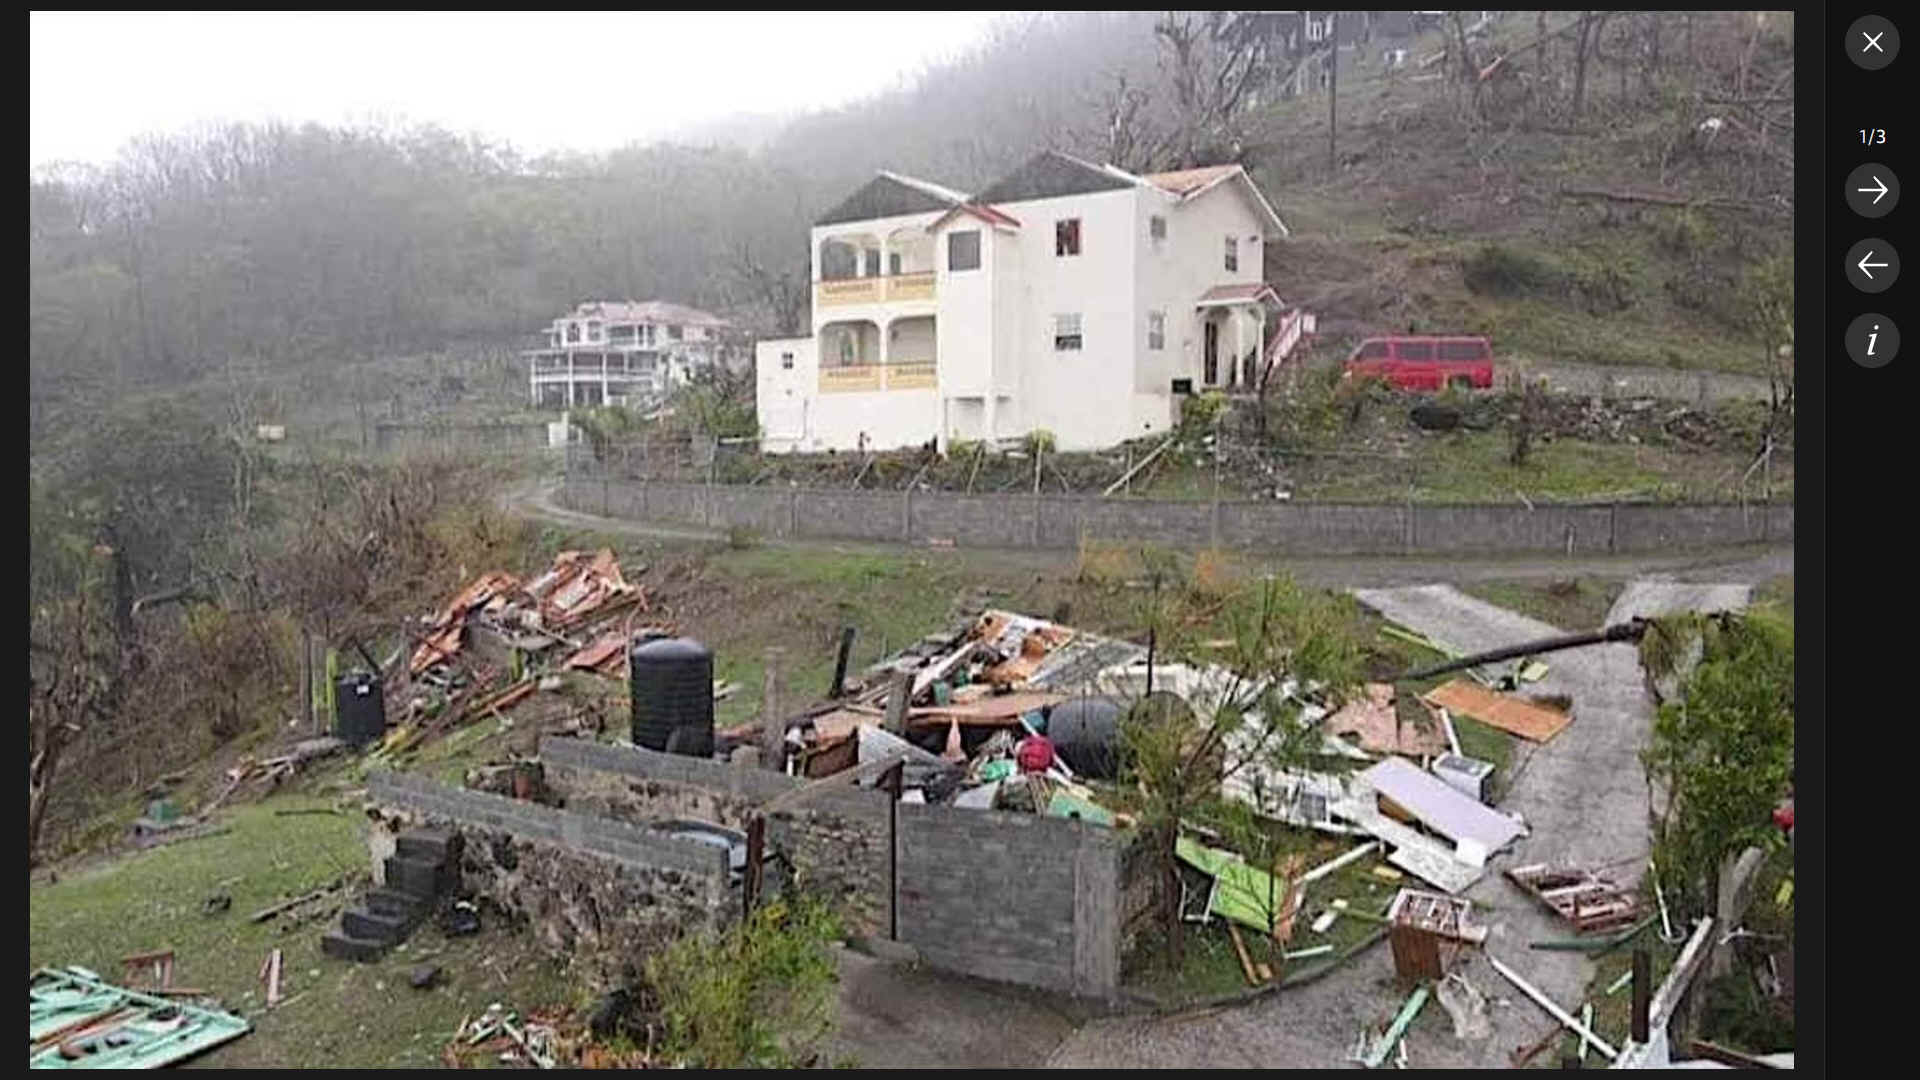 Saint Vincent is a Caribbean island that was battered by Hurricane Vincent in July 2024